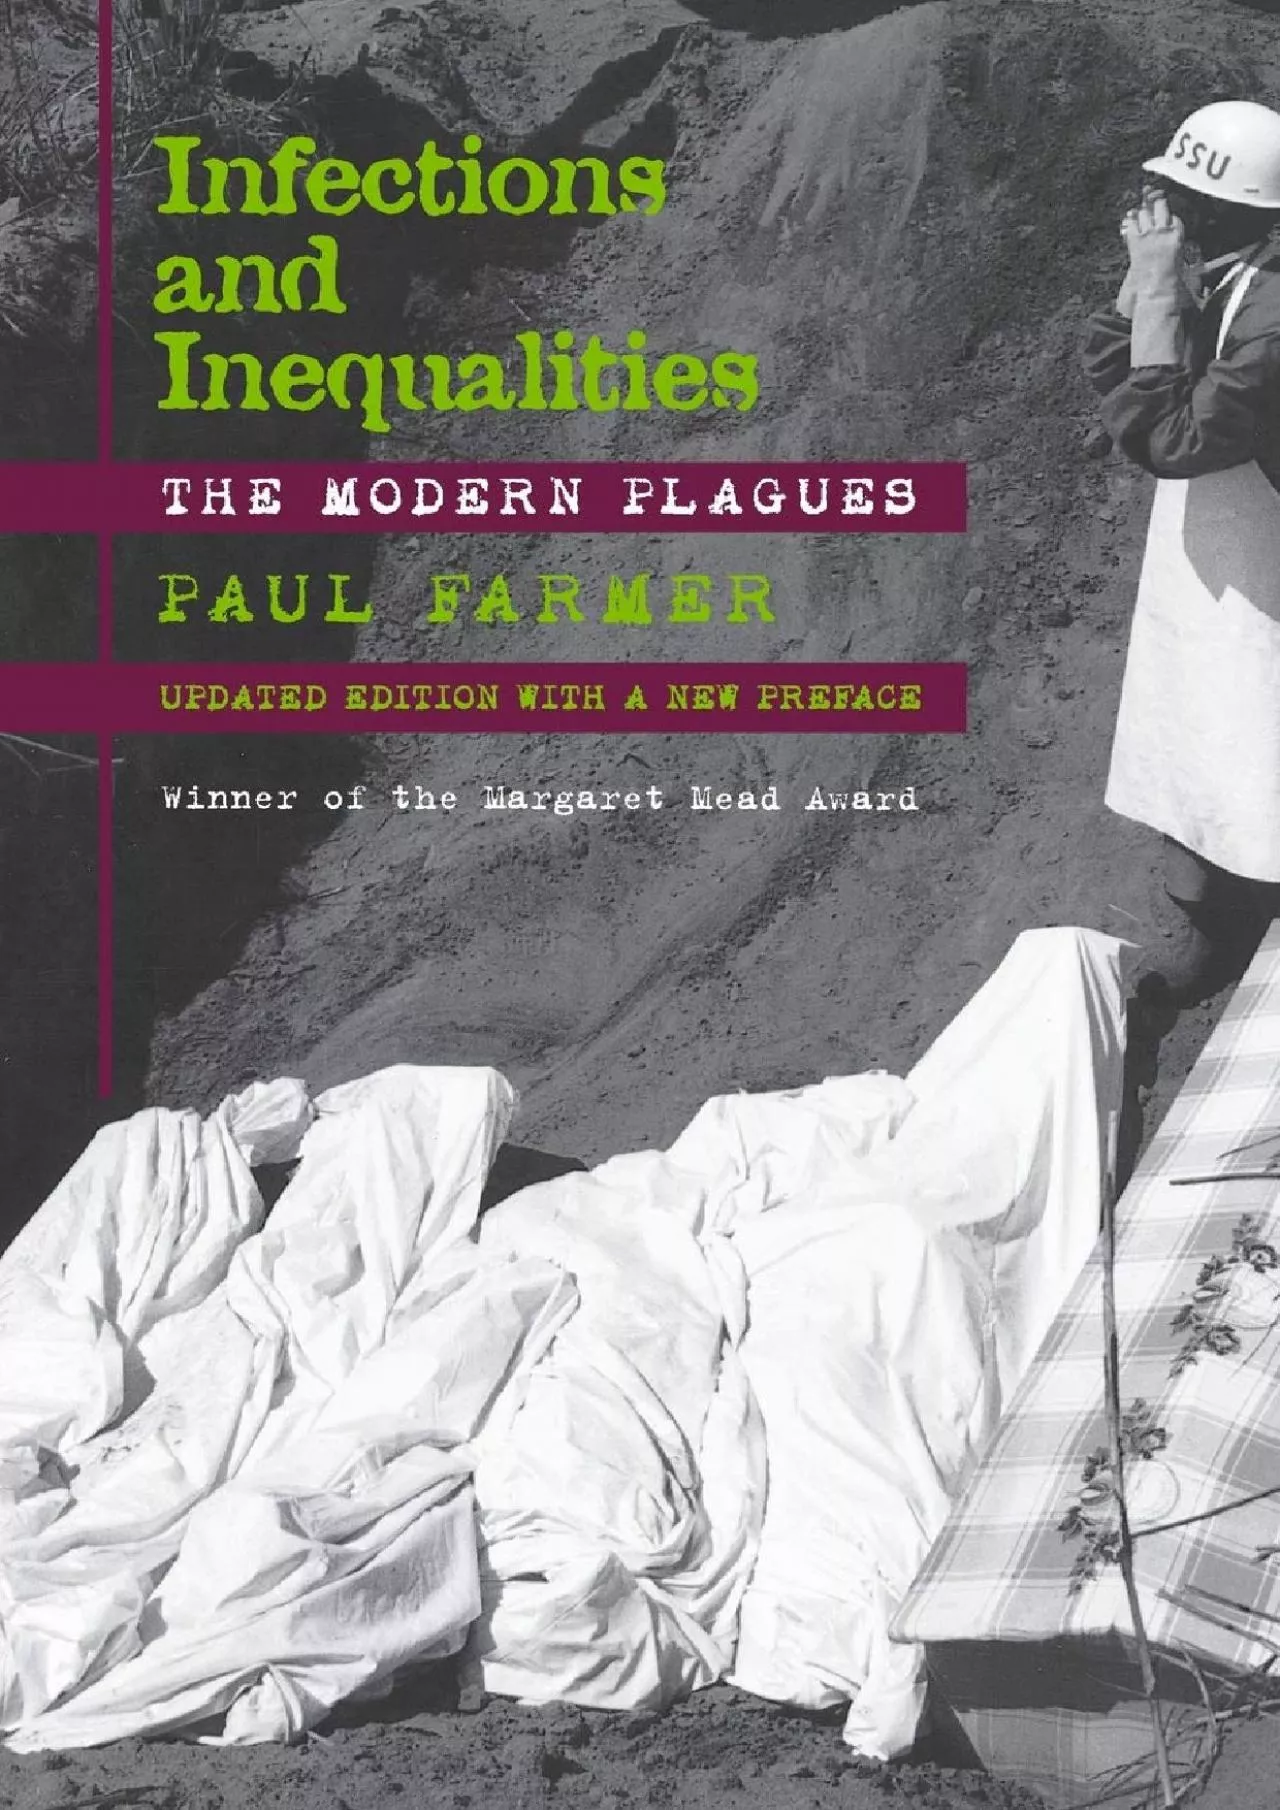 (EBOOK)-Infections and Inequalities: The Modern Plagues, Updated with a New Preface